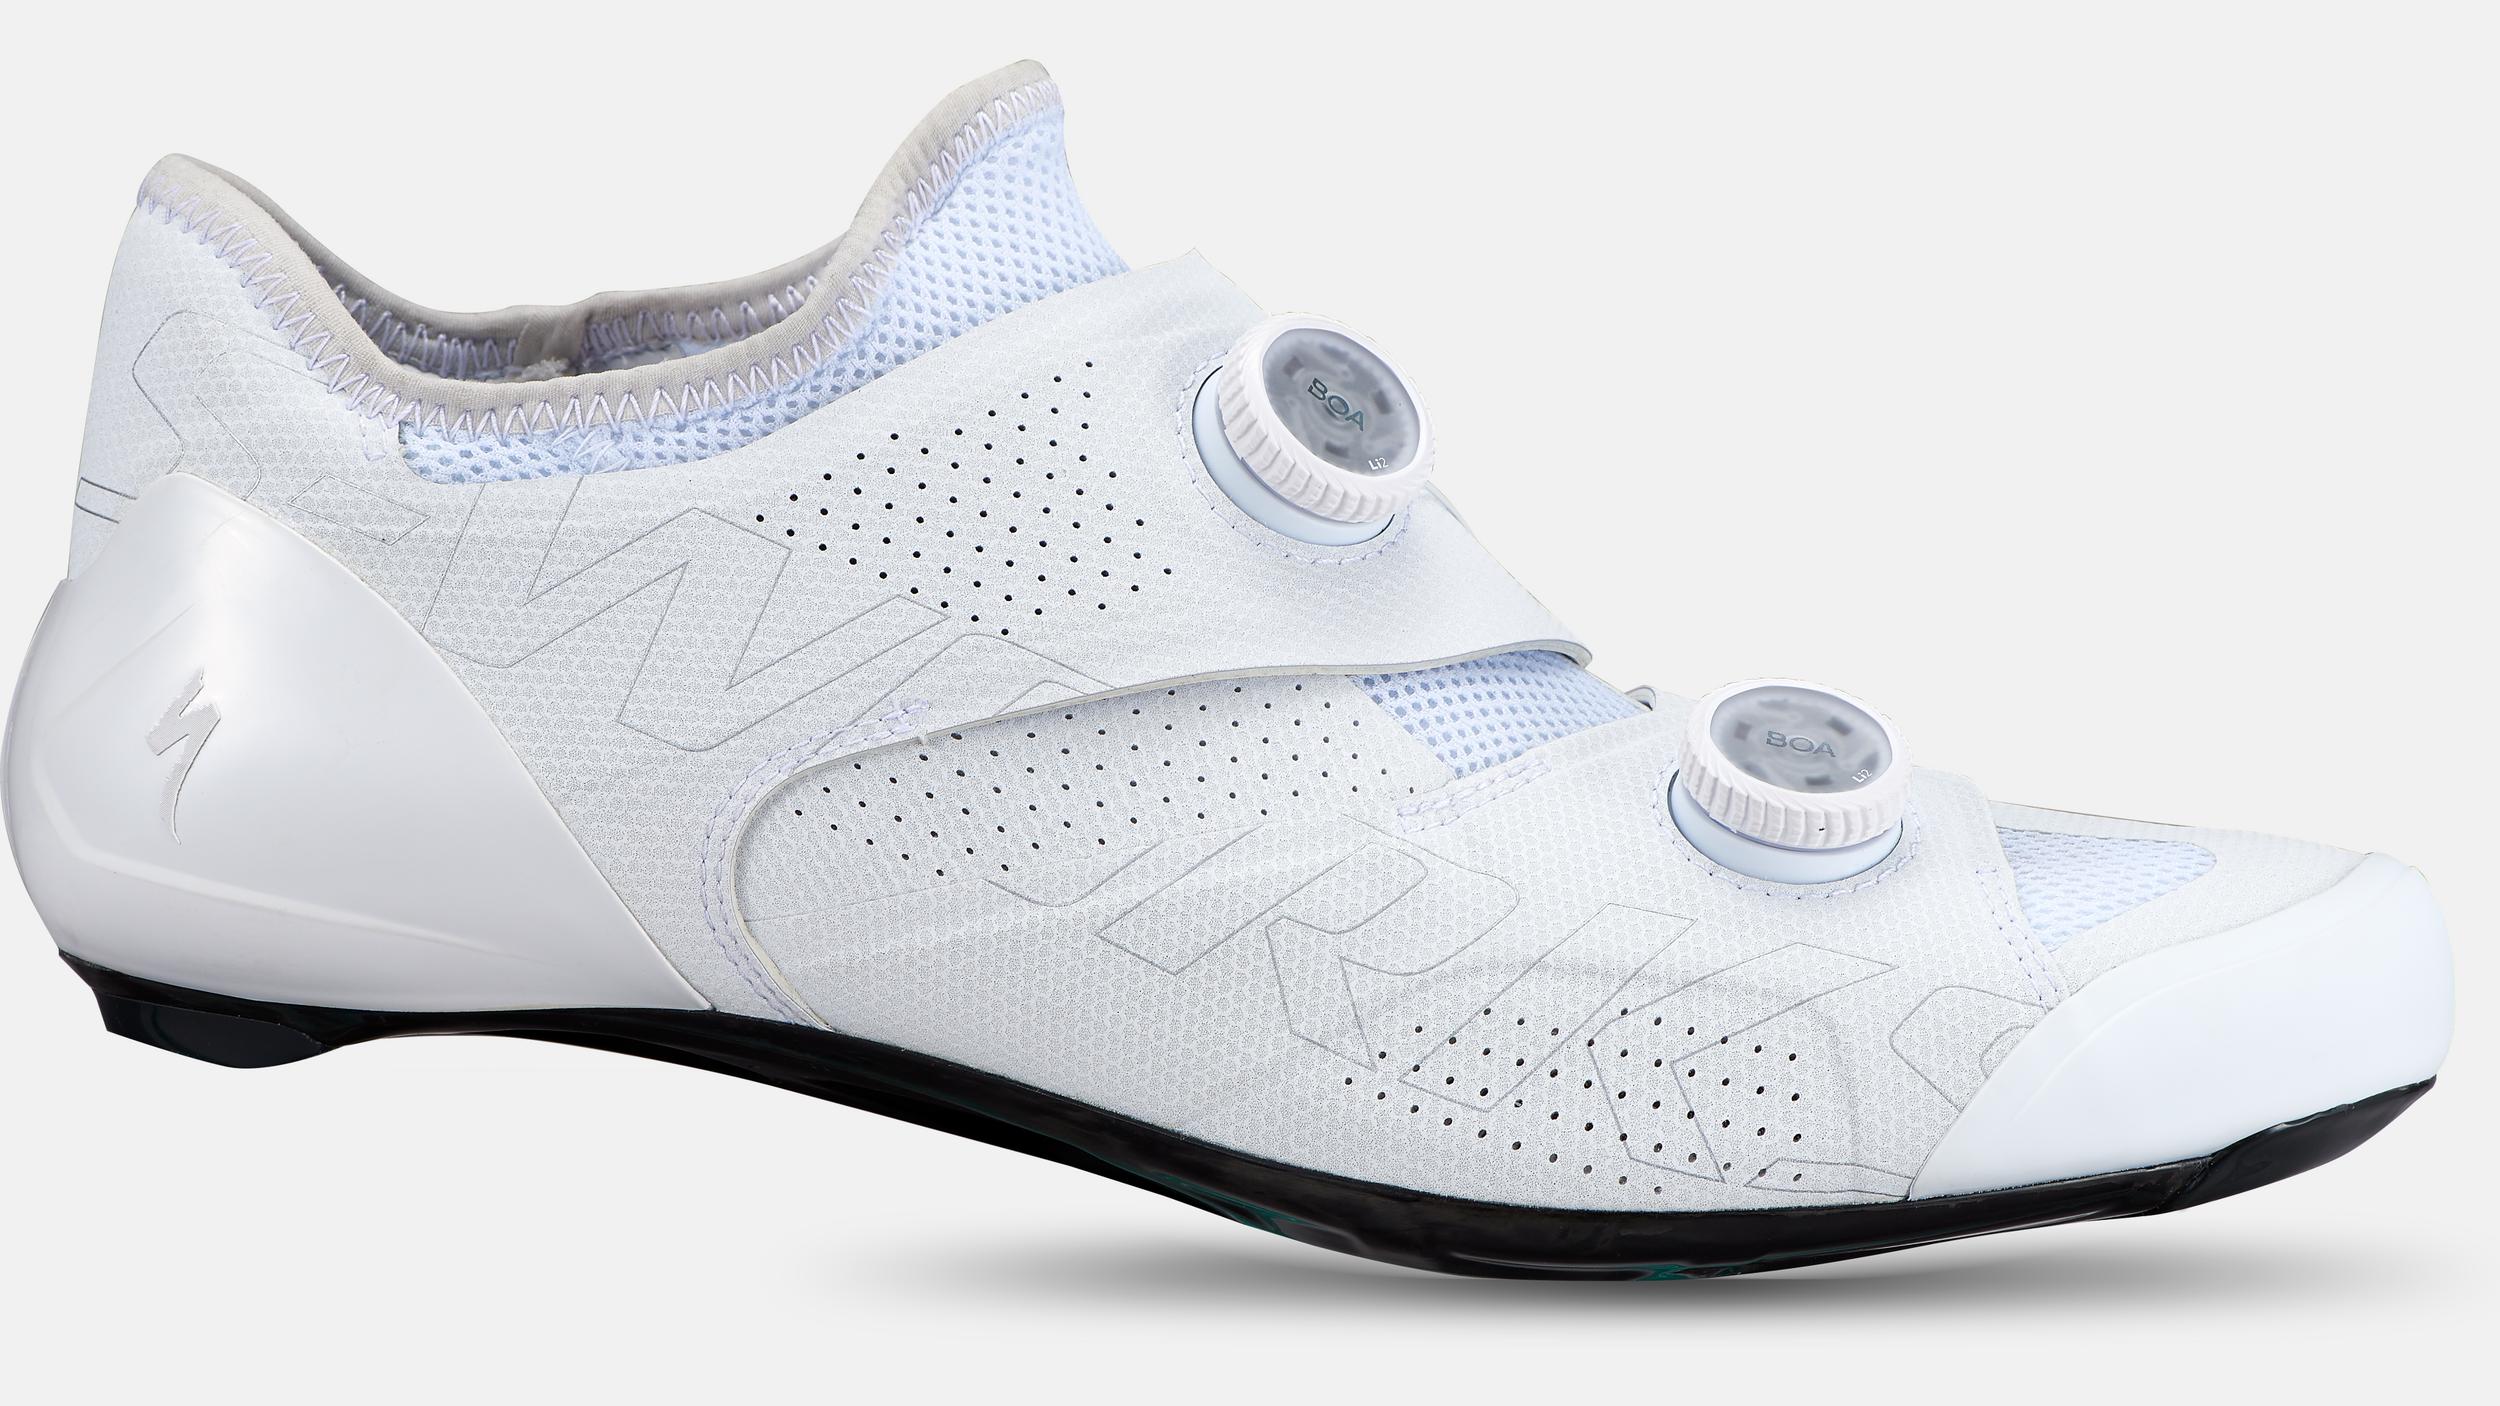 Chaussures Vélo Route S-Works Ares Specialized.com